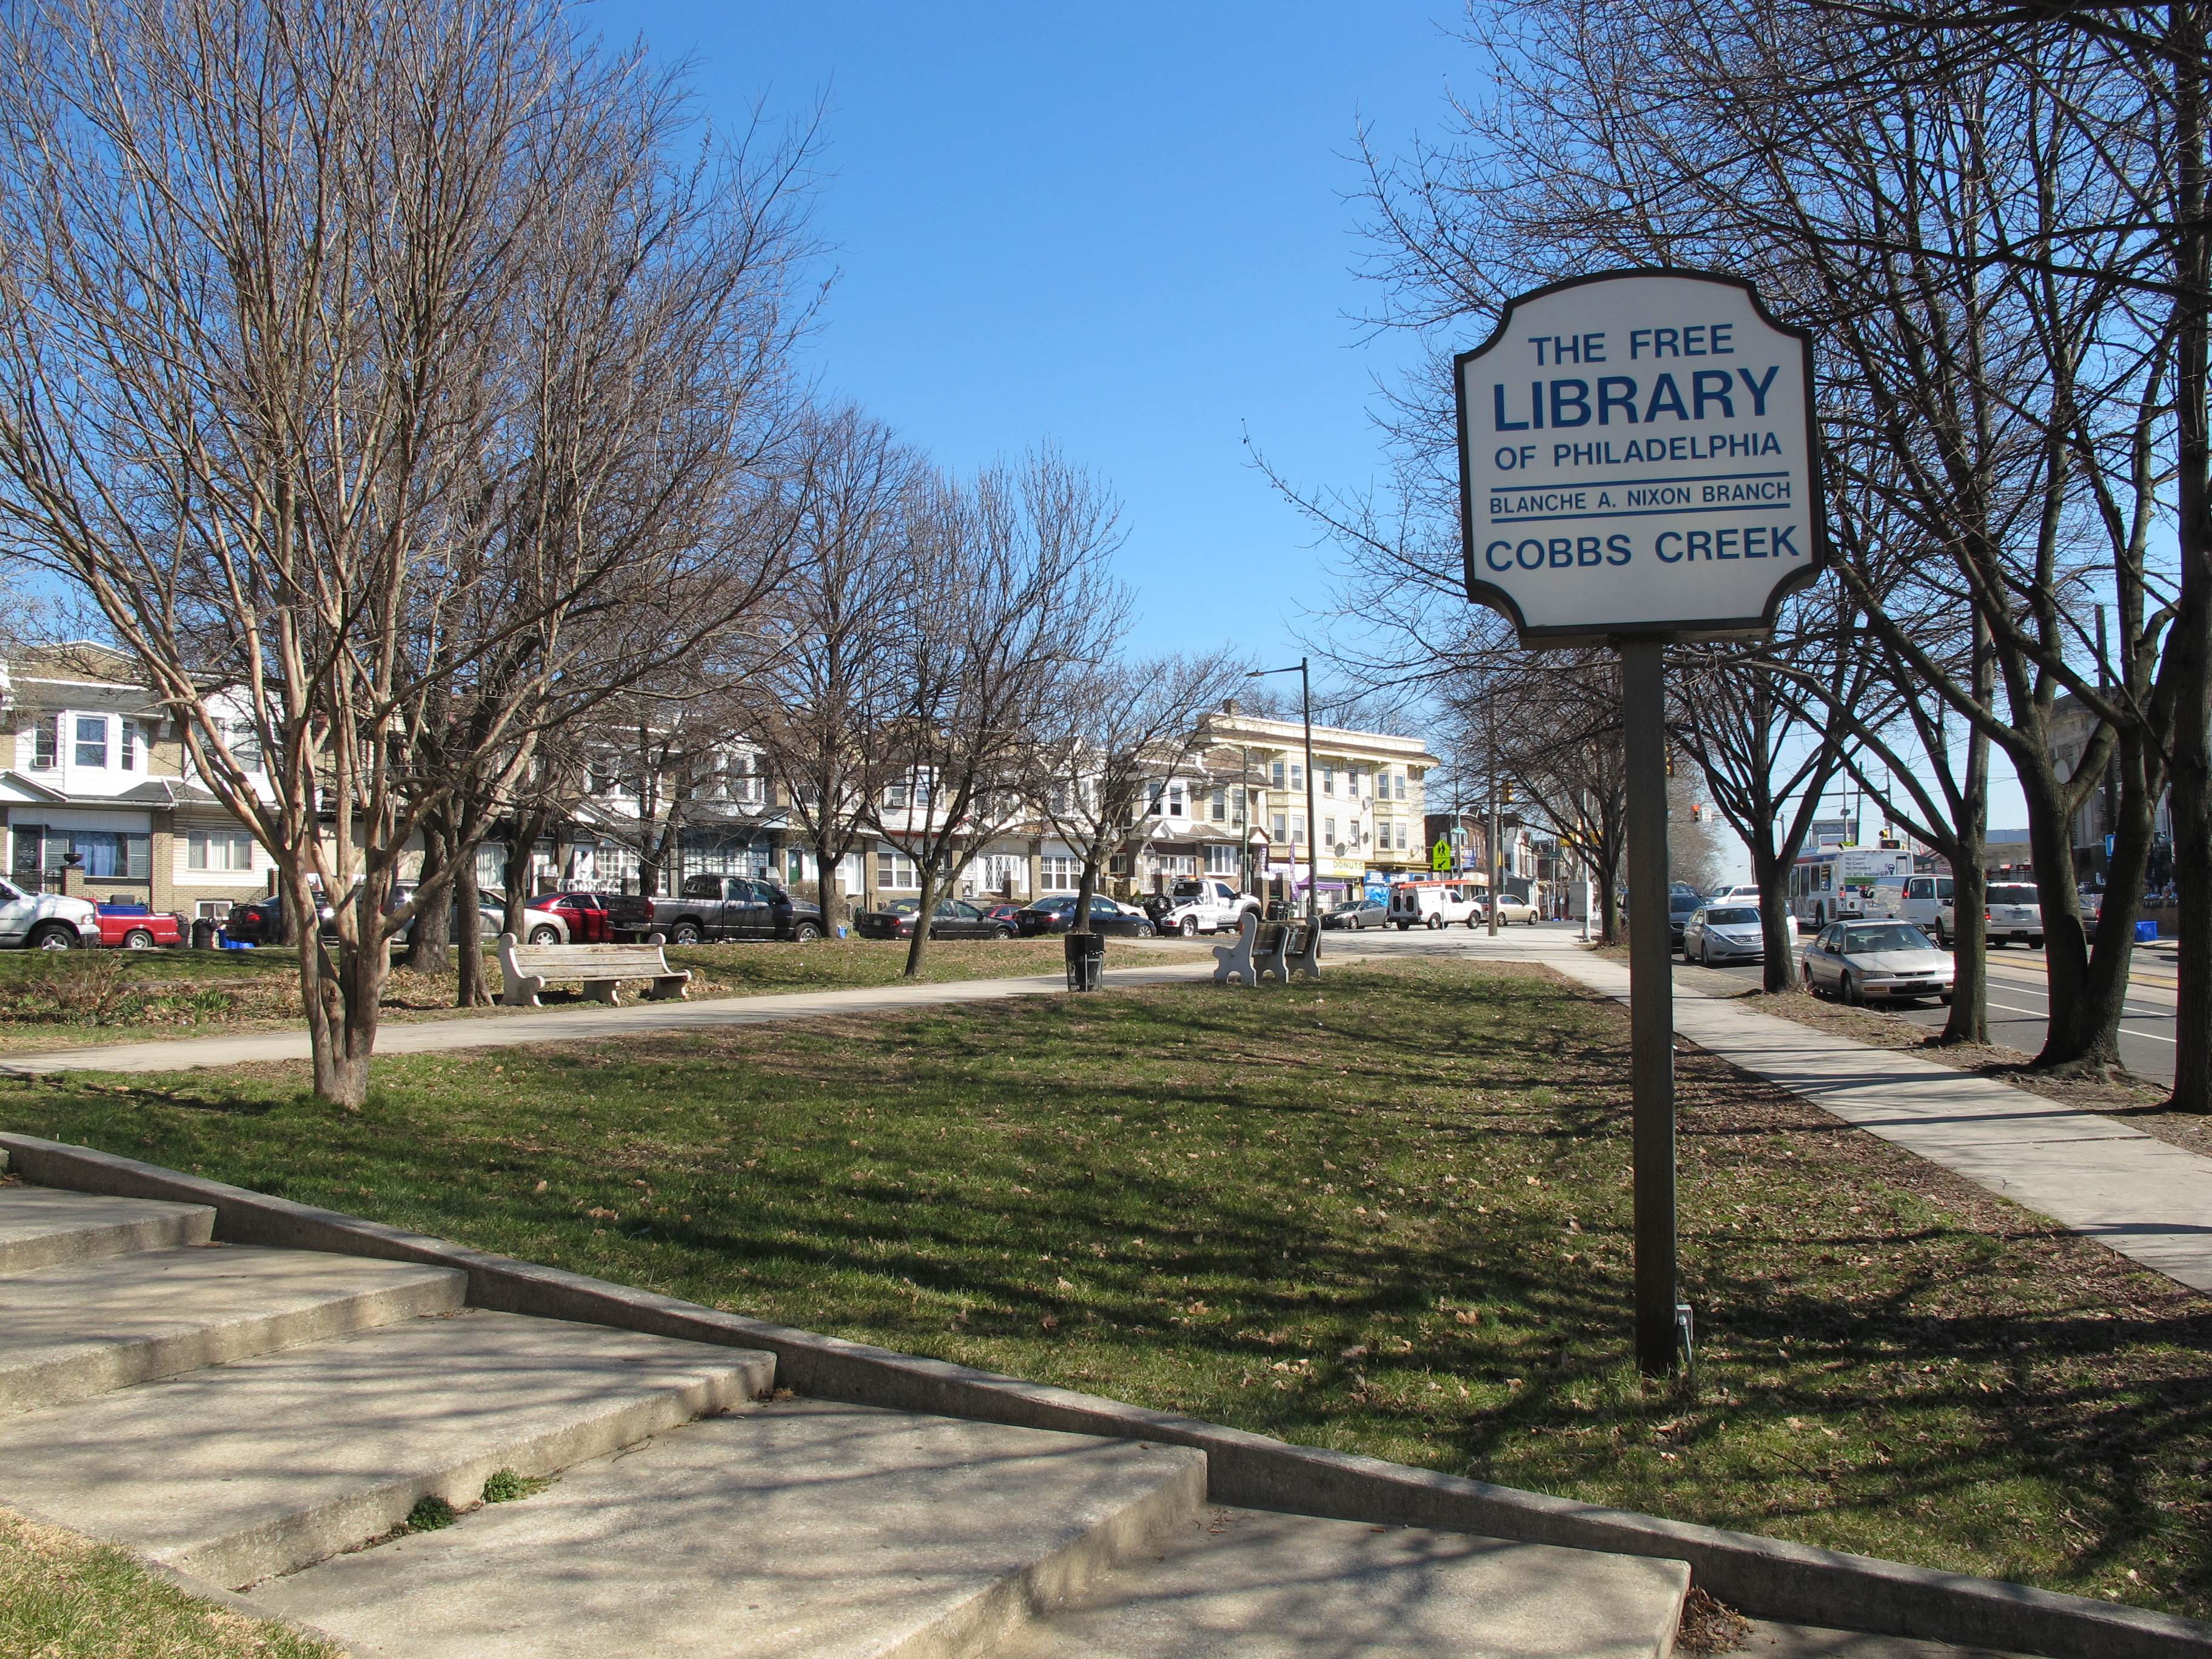 Learning Landscapes: Blanche A. Nixon / Cobbs Creek Branch Library